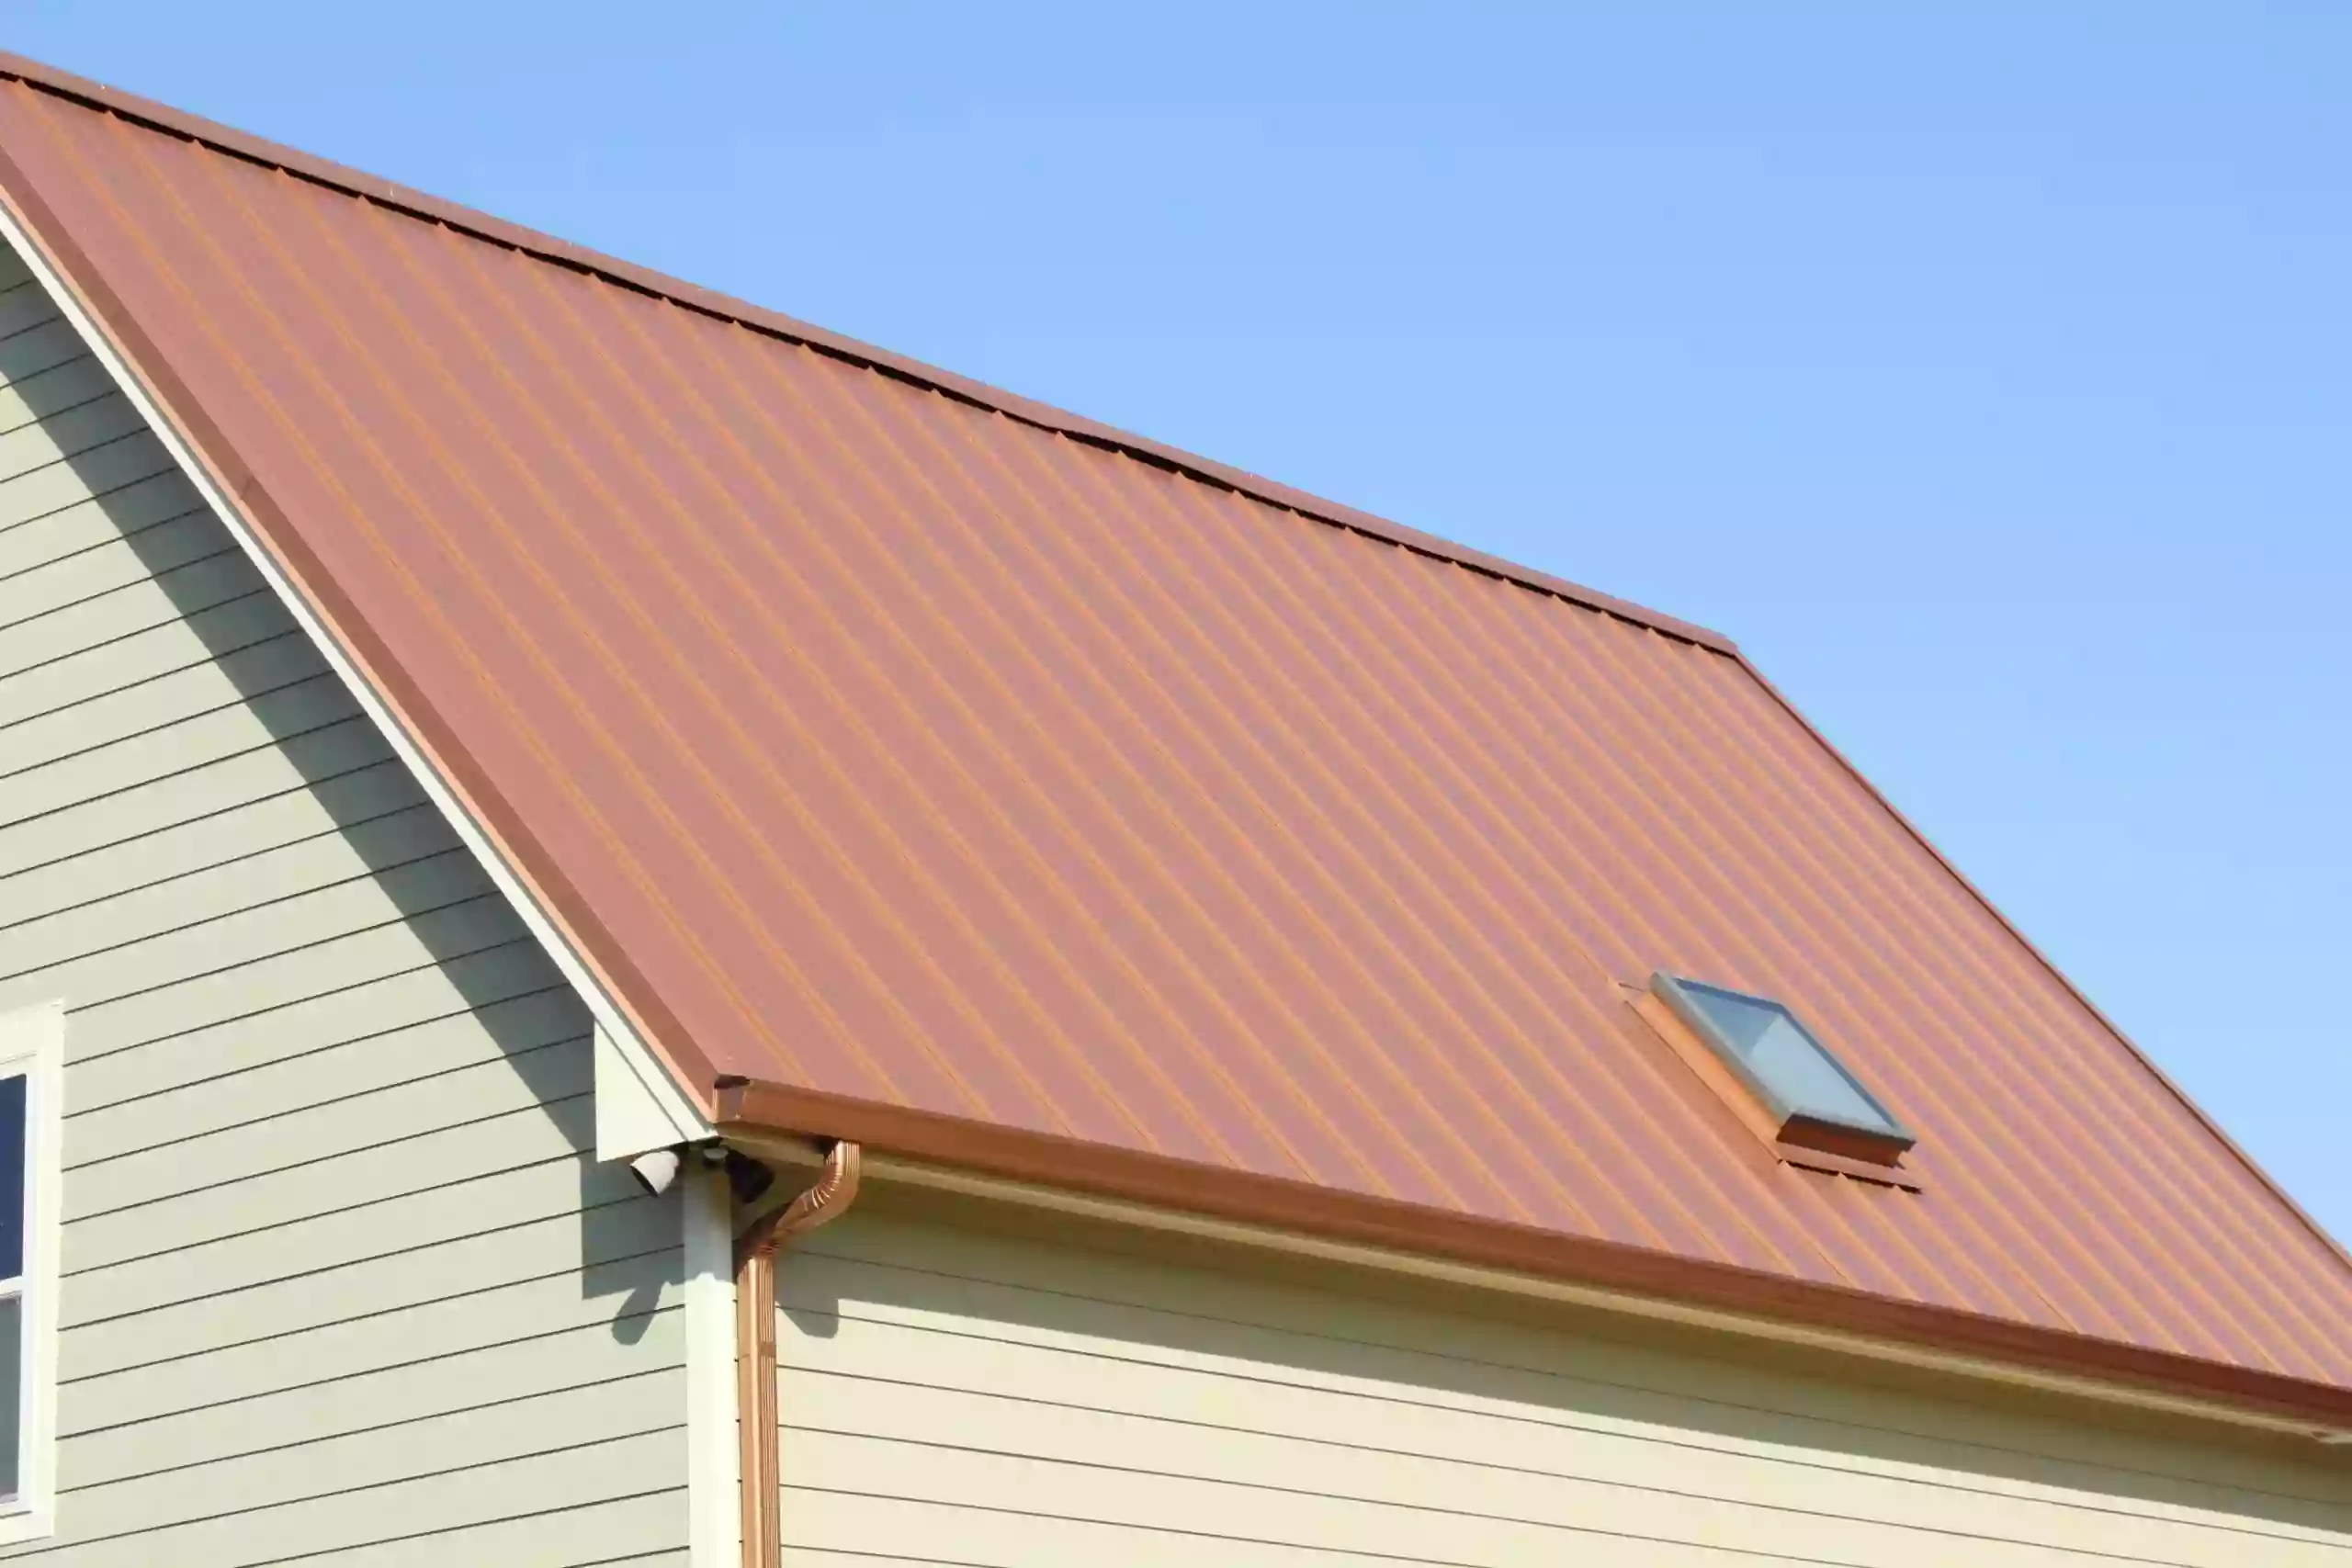 MetalMax Roofing and Siding